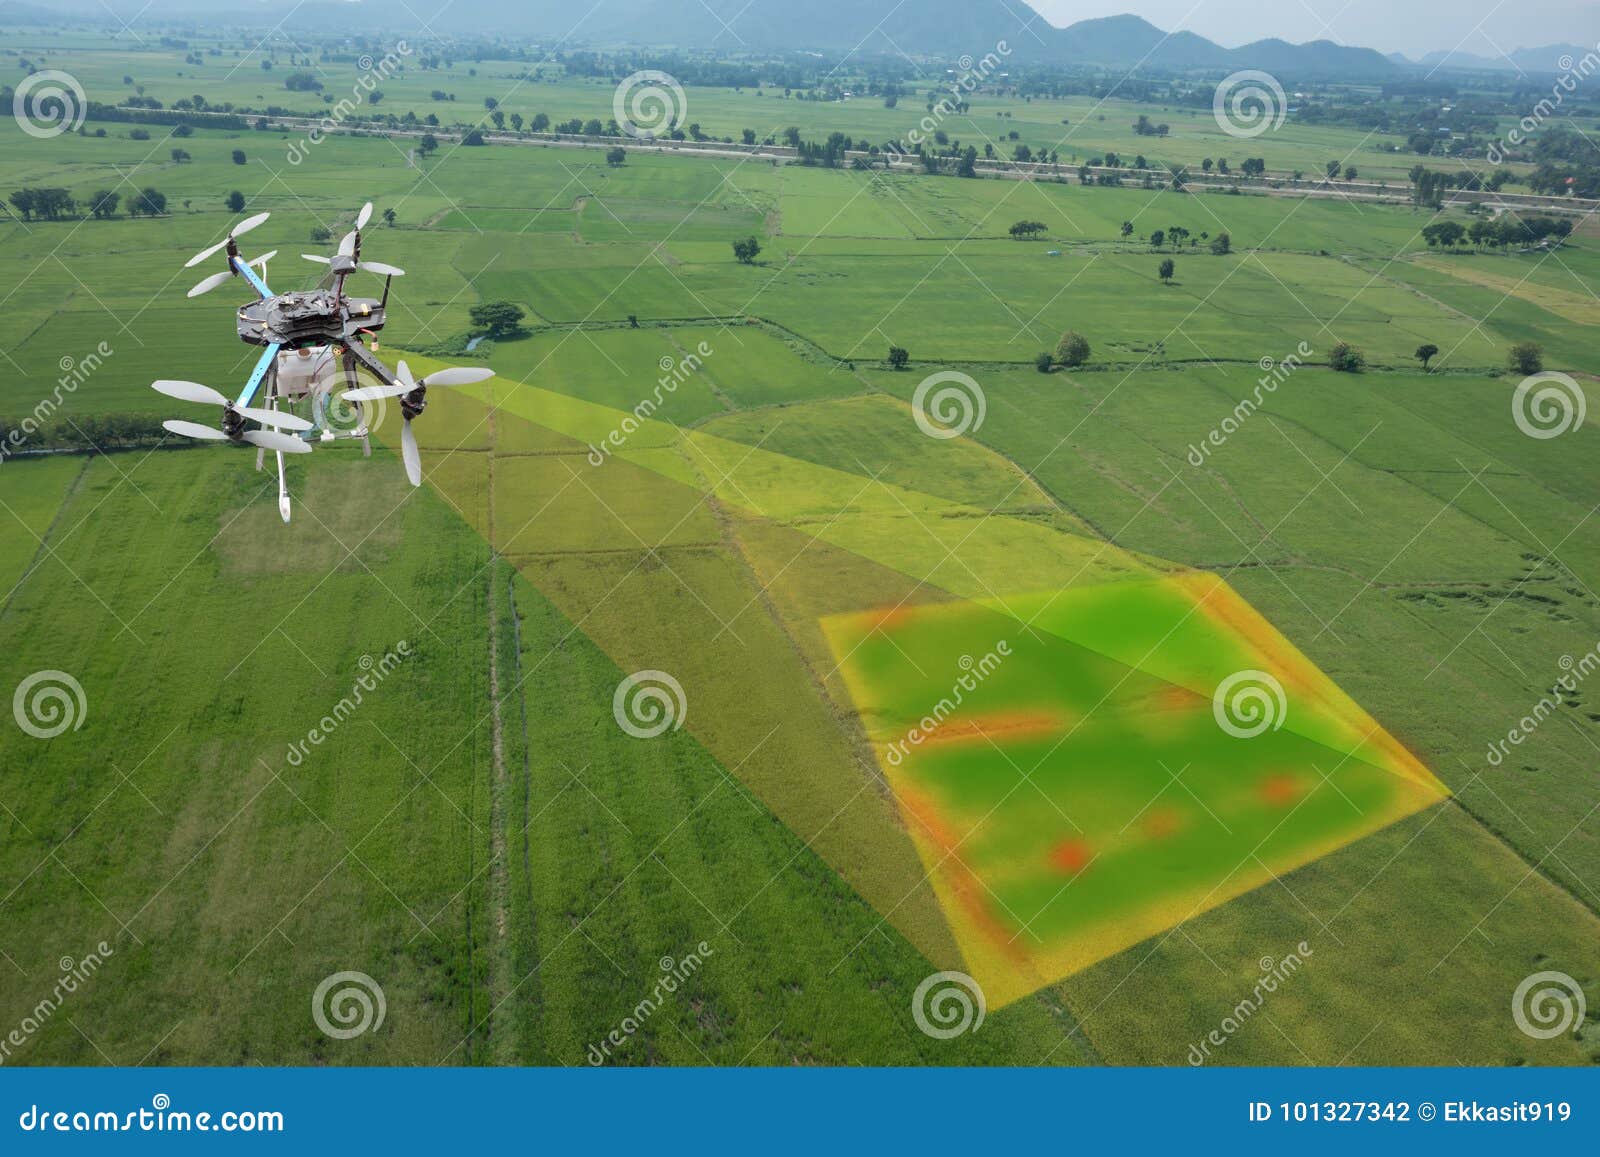 drone for agriculture, drone use for various fields